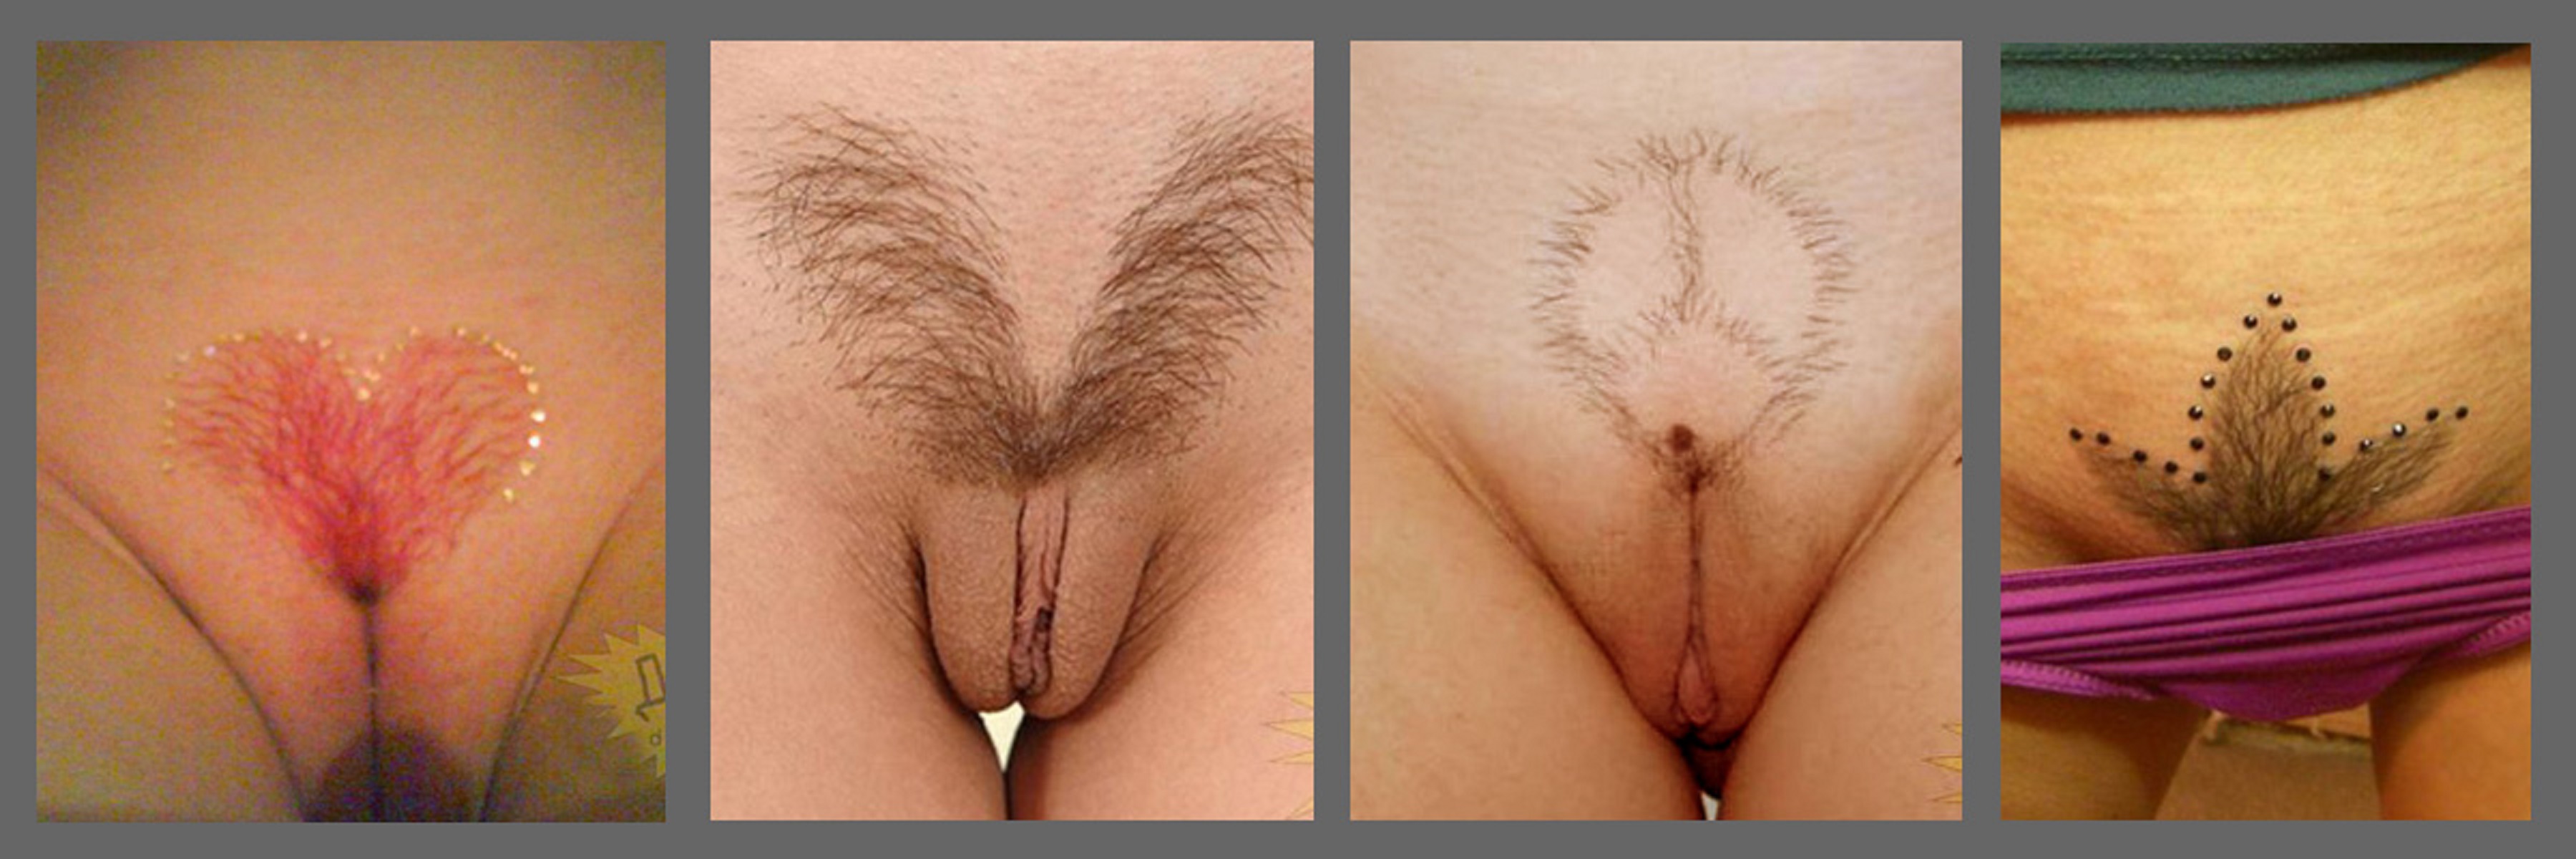 Designs to shave pubic hair